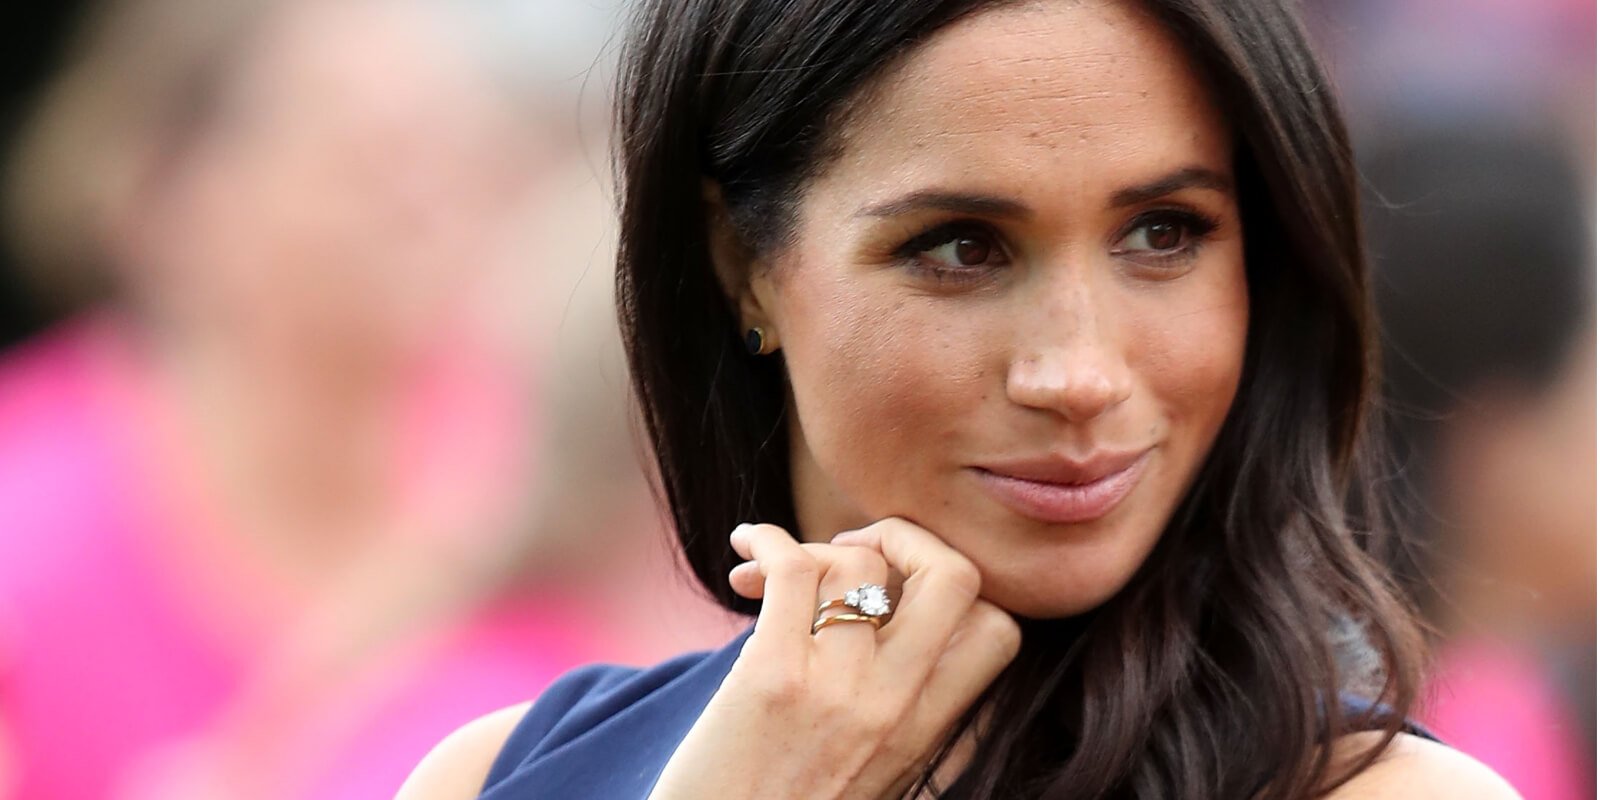 Meghan Markle looks away from the camera during an official royal event in 2018.